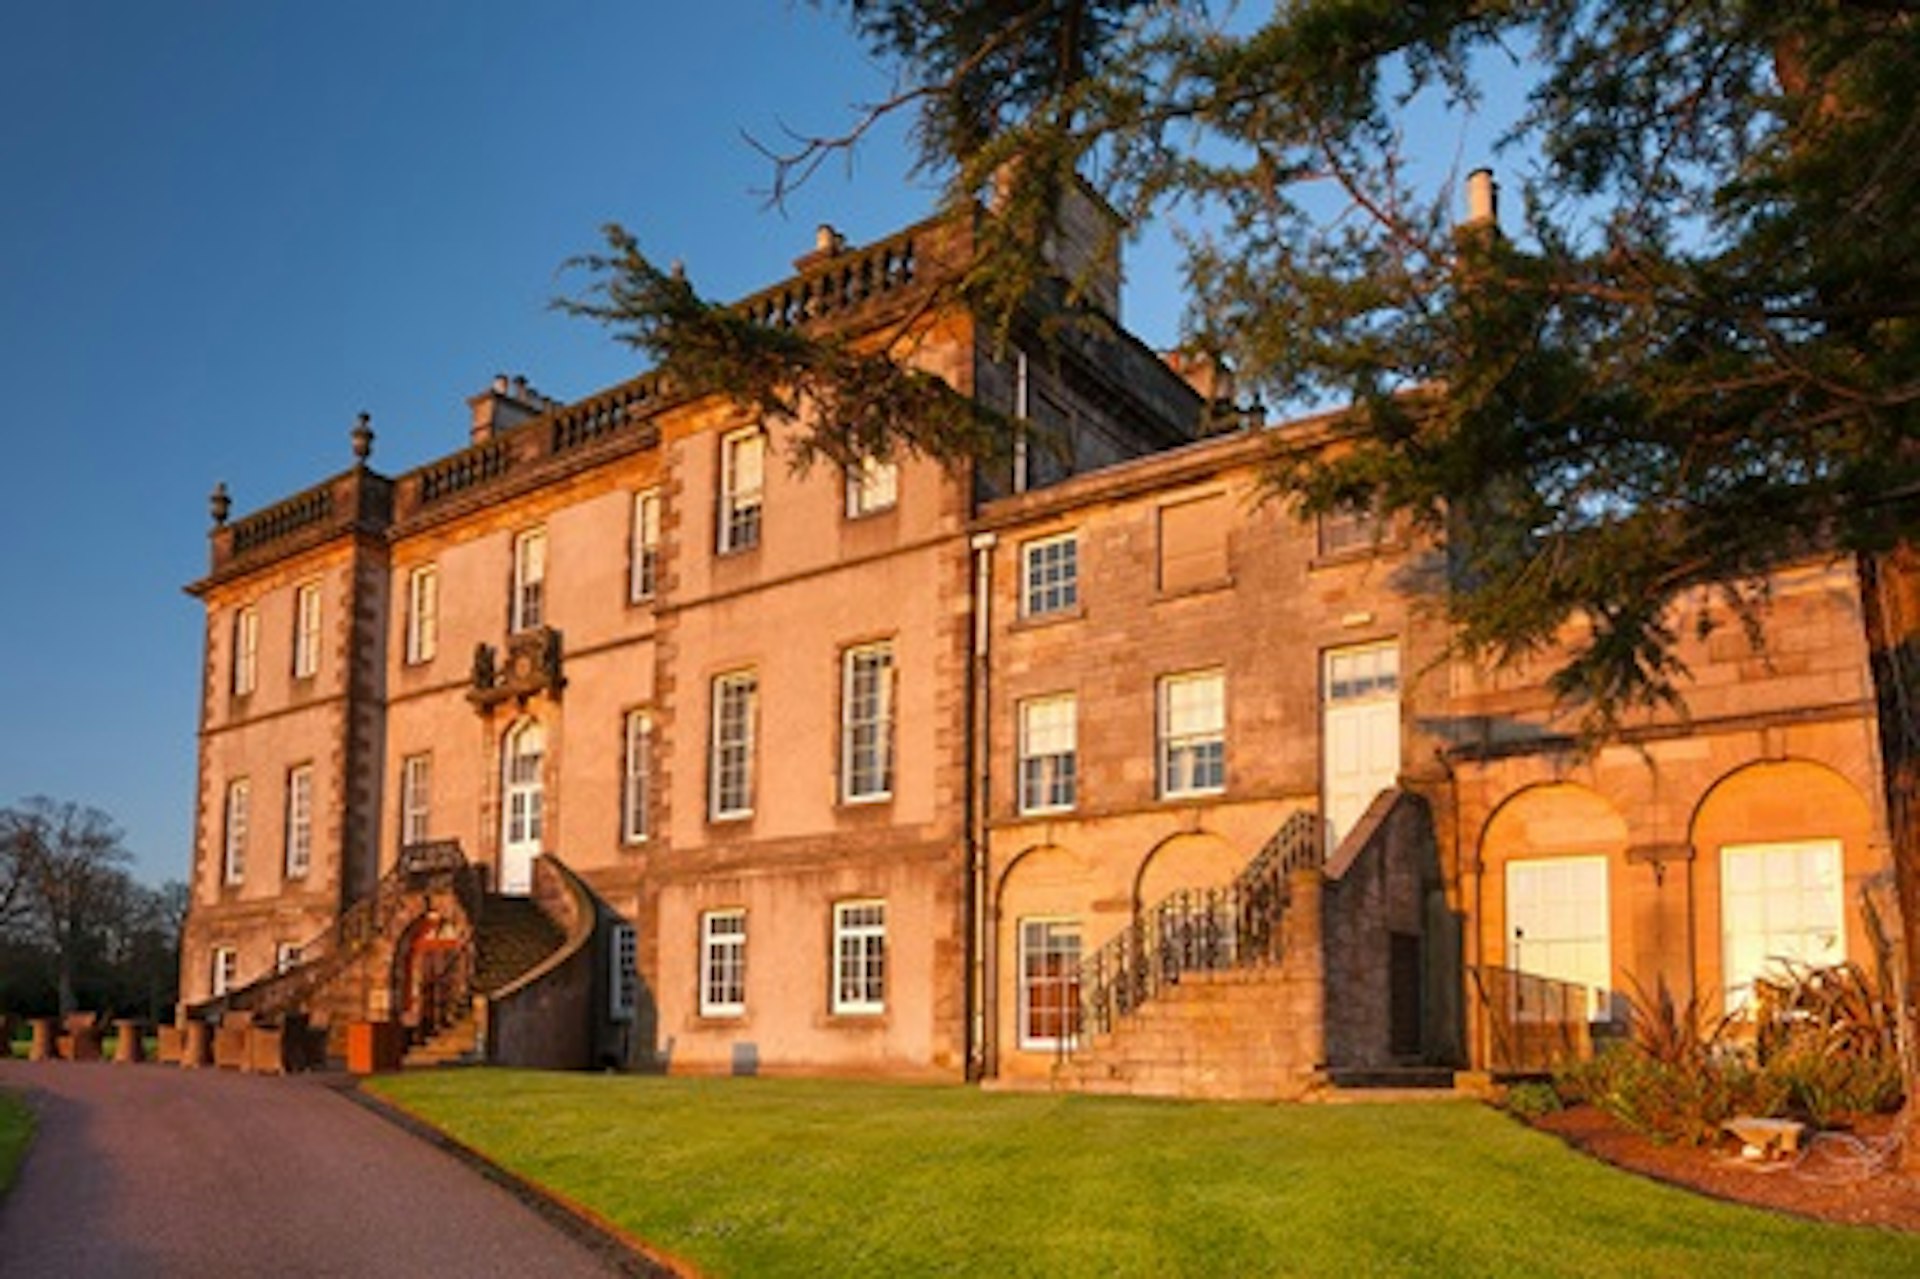 Winter Two Night Scottish Break with Dinner for Two at the 4* Dalmahoy Hotel & Country Club, Edinburgh